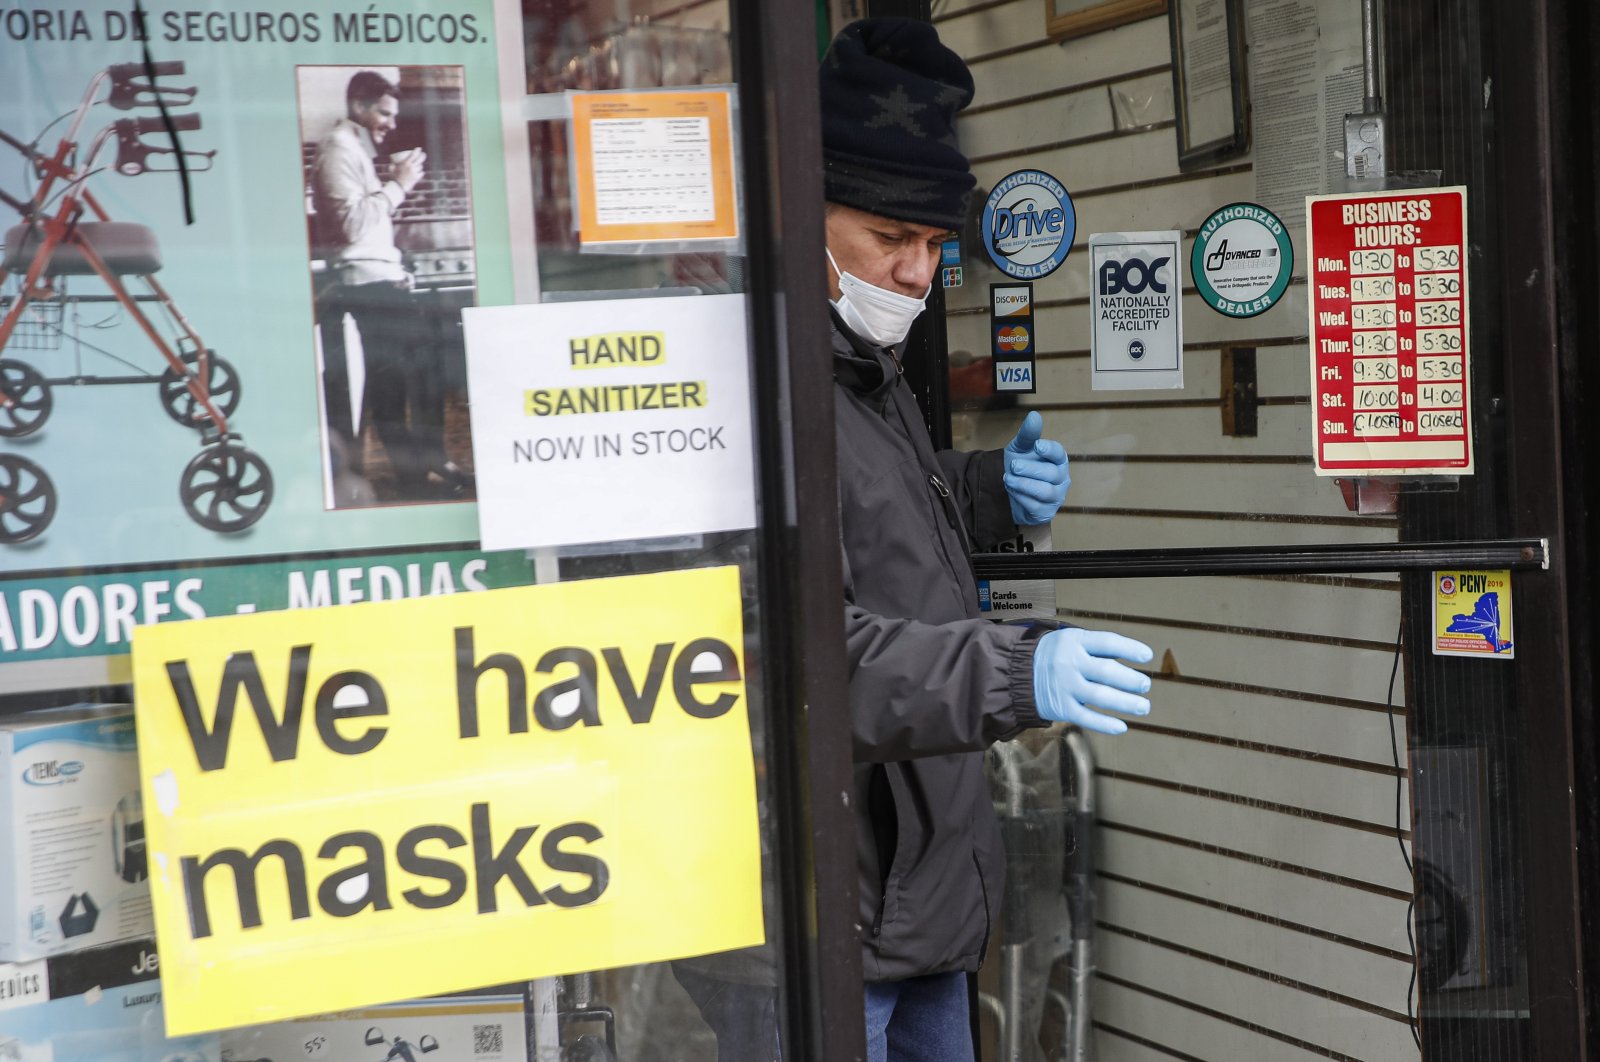 A customer leaves a shop advertising personal protective equipment near Elmhurst Hospital Center, New York, Wednesday, March 25, 2020. (AP Photo)